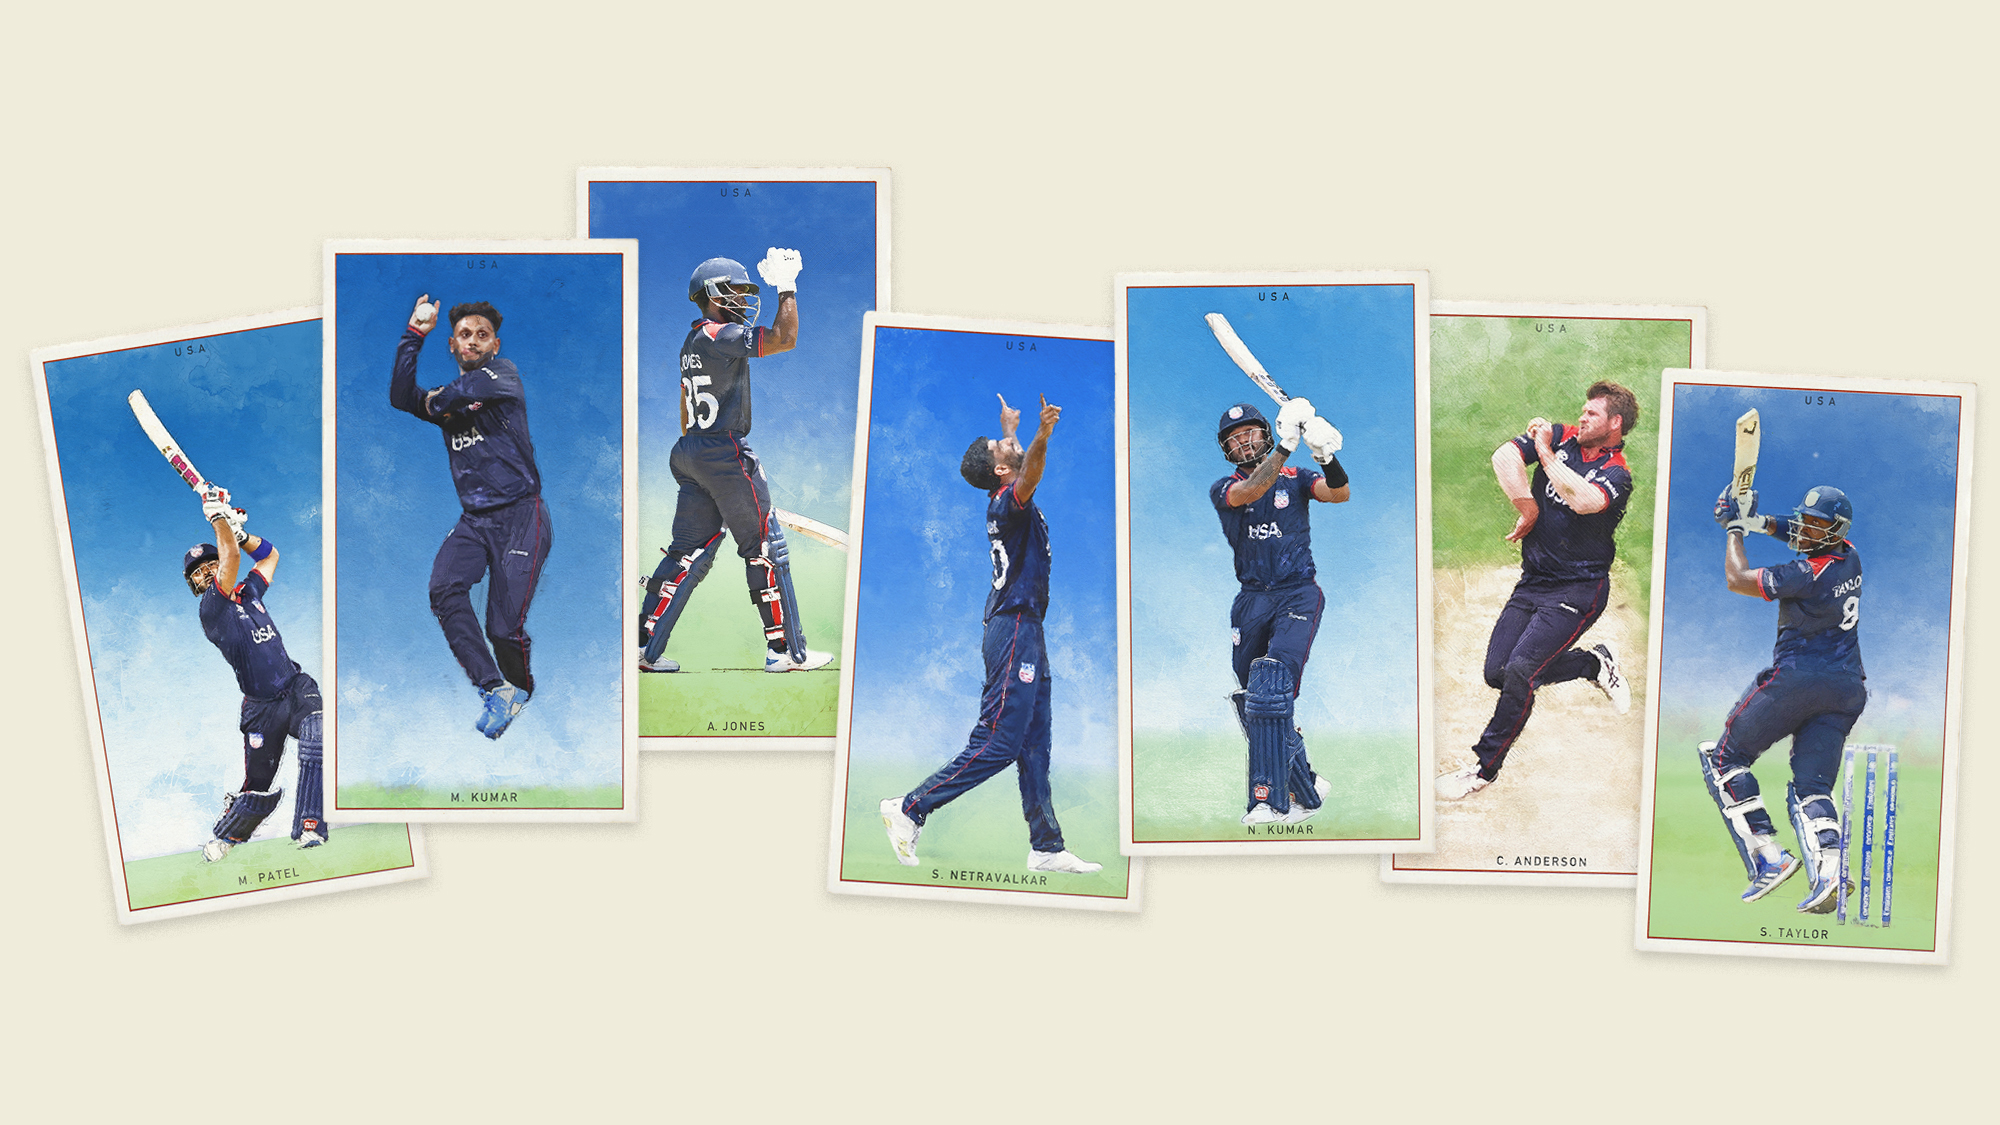 The U.S. men's cricket team illustrated in the style of old cricket sports cards